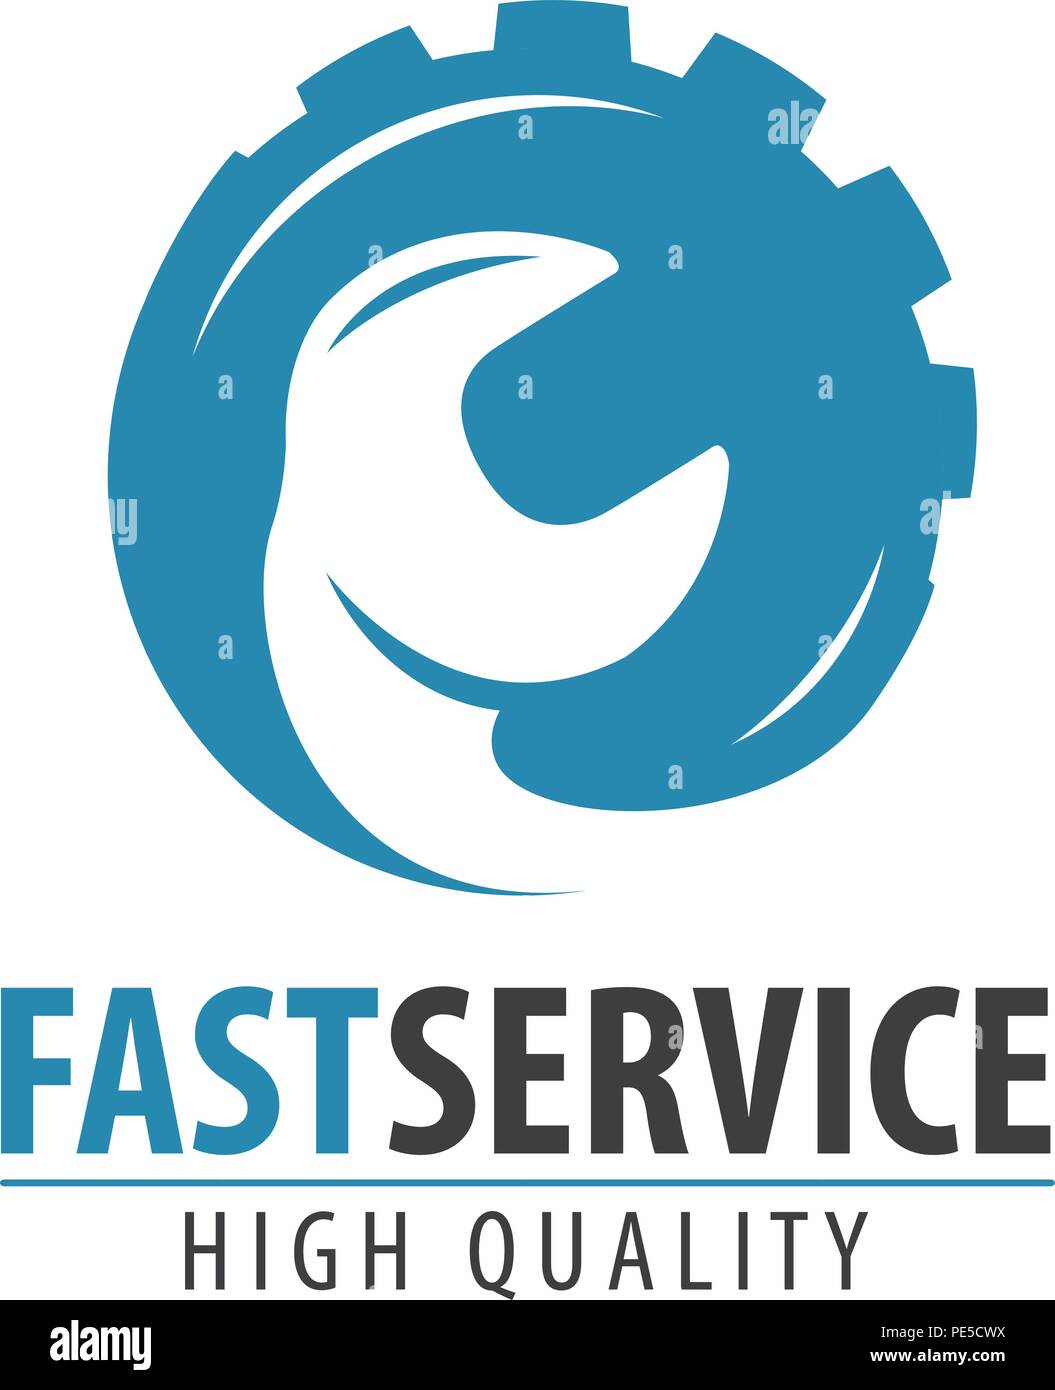 Fast service logo or label. Repair, maintenance work icon Stock Vector